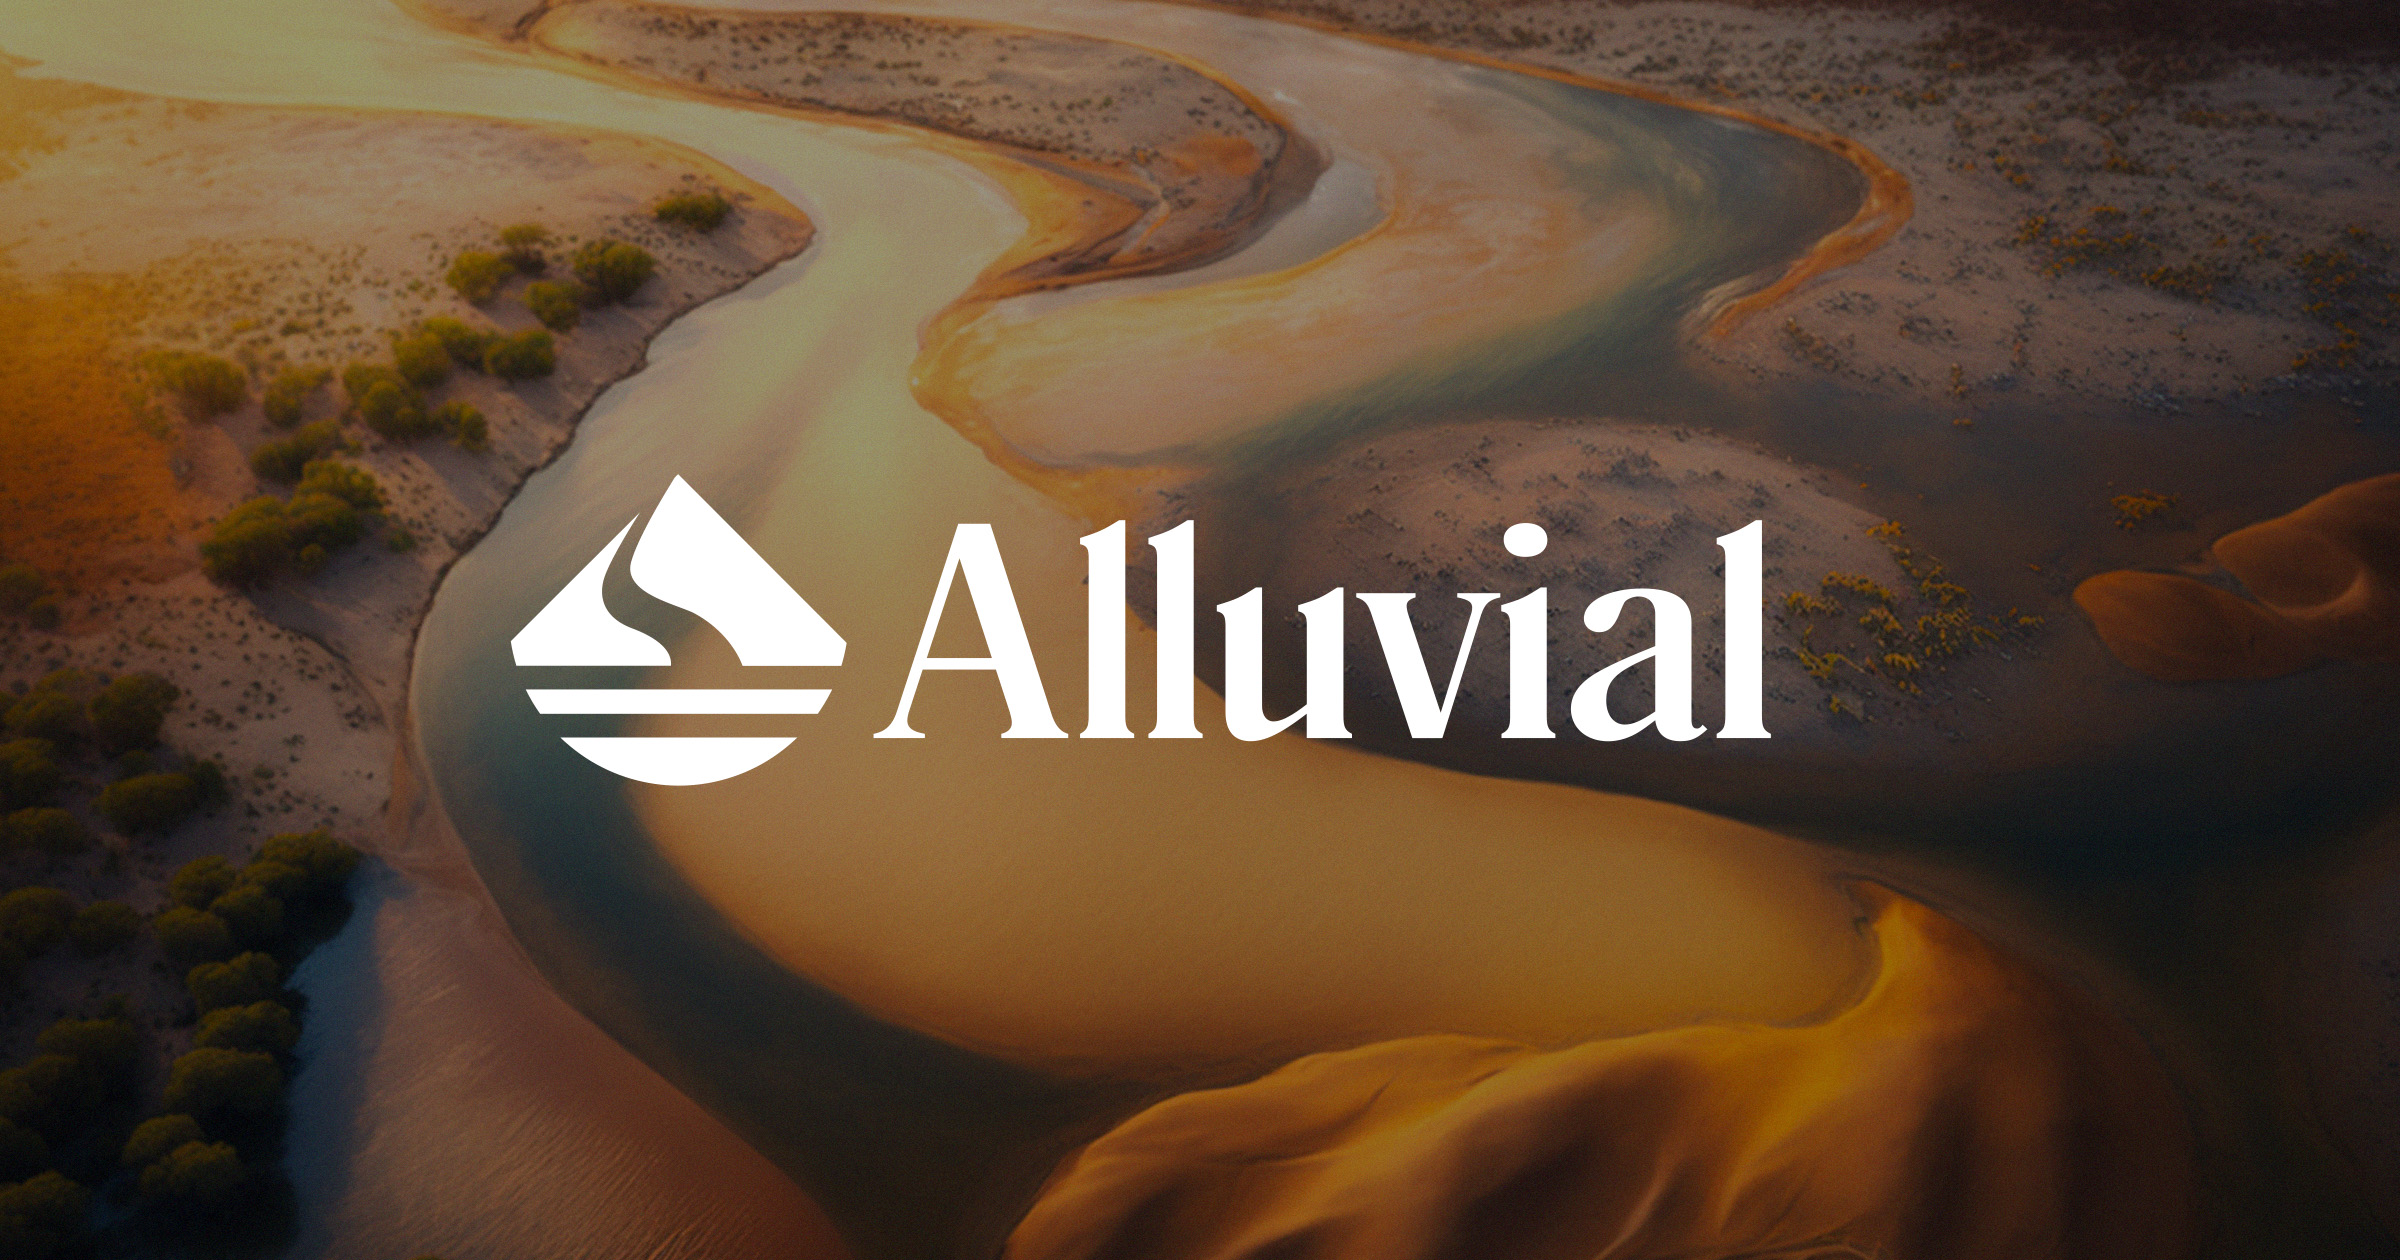 Alluvial Announces Executive Leadership Changes to Accelerate Growth